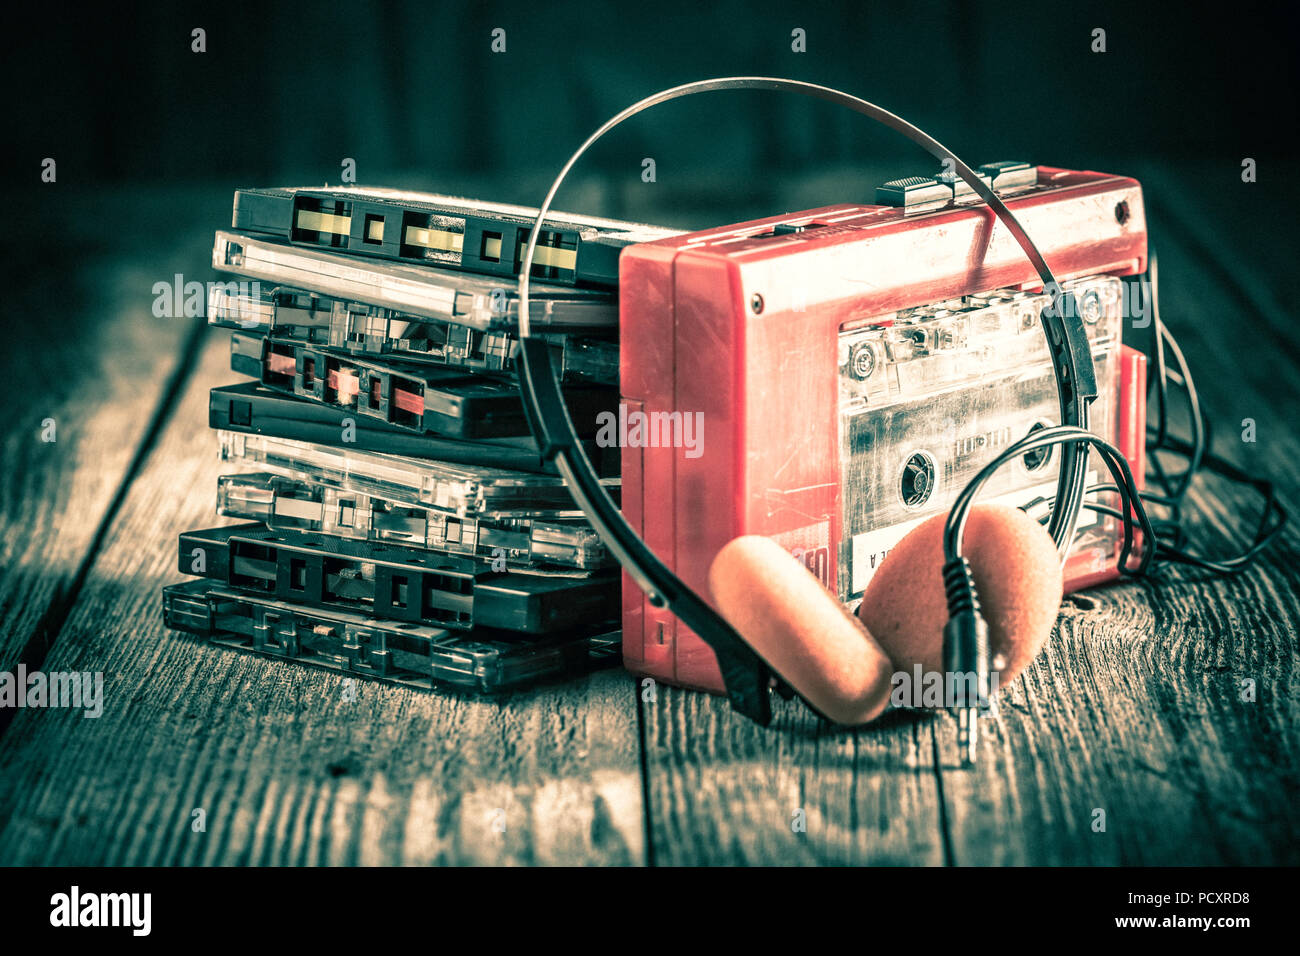 Page 3 Walkman 80s High Resolution Stock Photography And Images Alamy